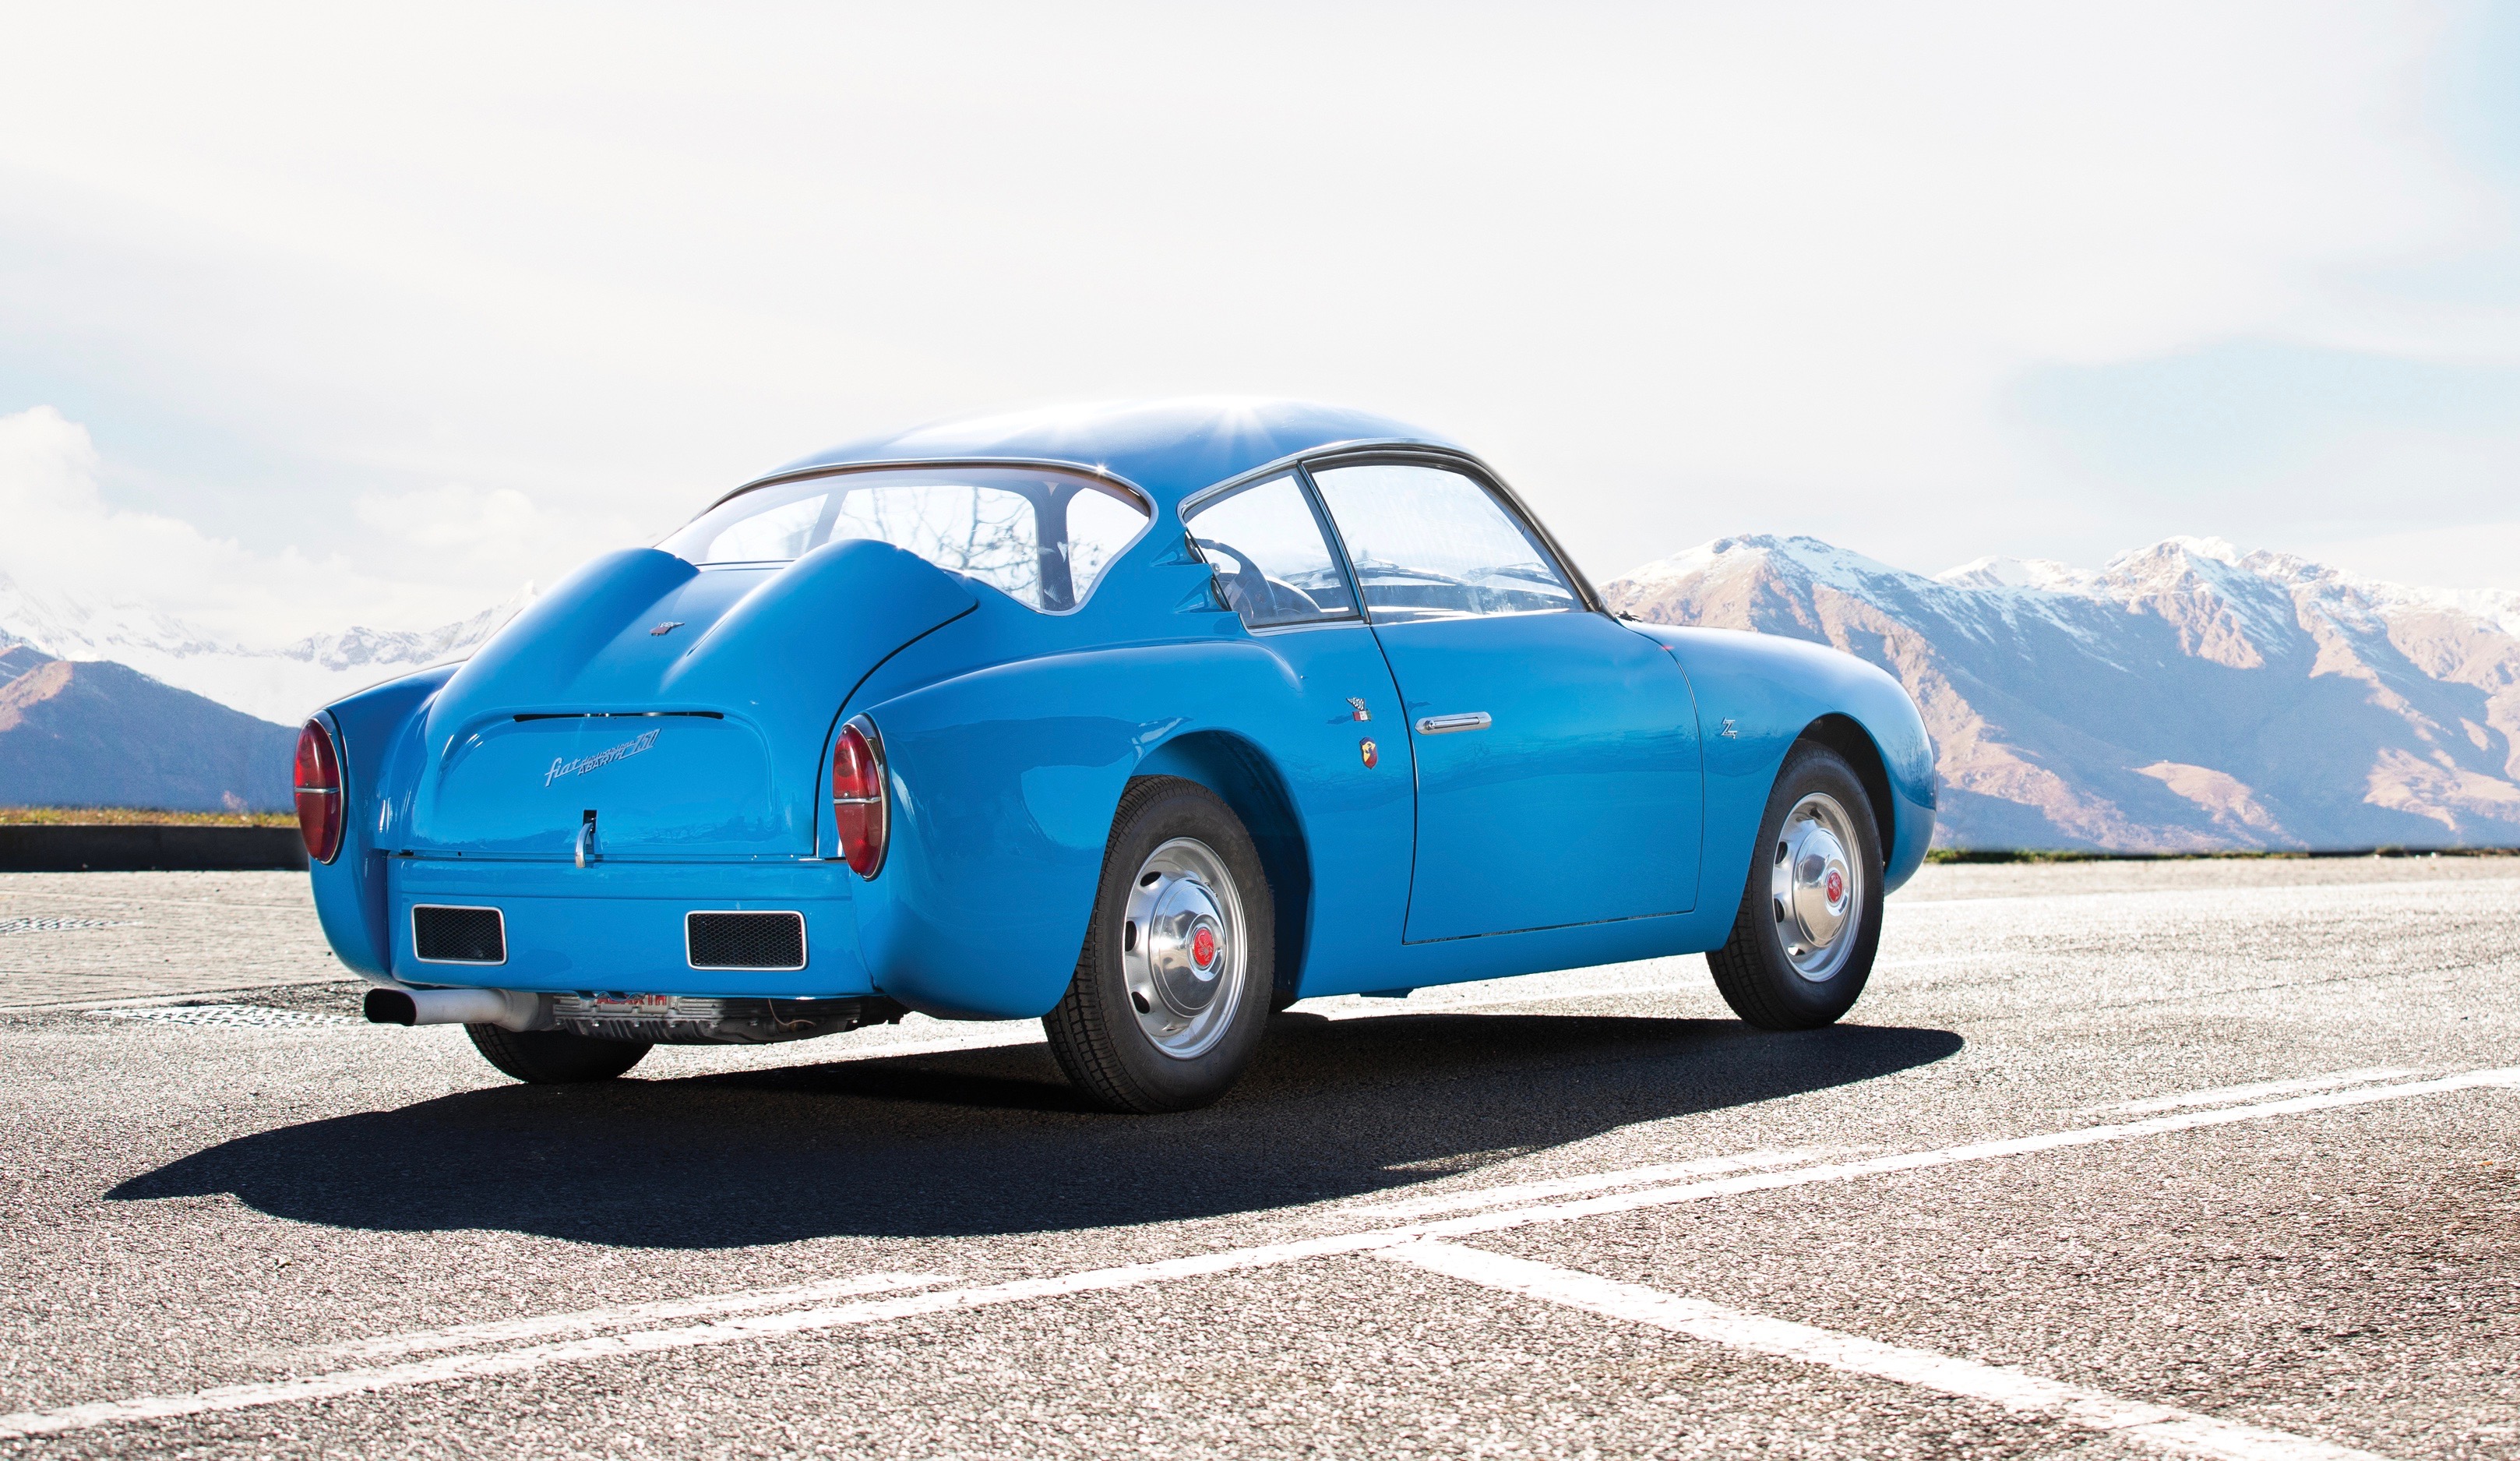 RM Sotheby's, RM Sotheby’s docket includes Zagato designs &#8211; the cars and the drawings, ClassicCars.com Journal